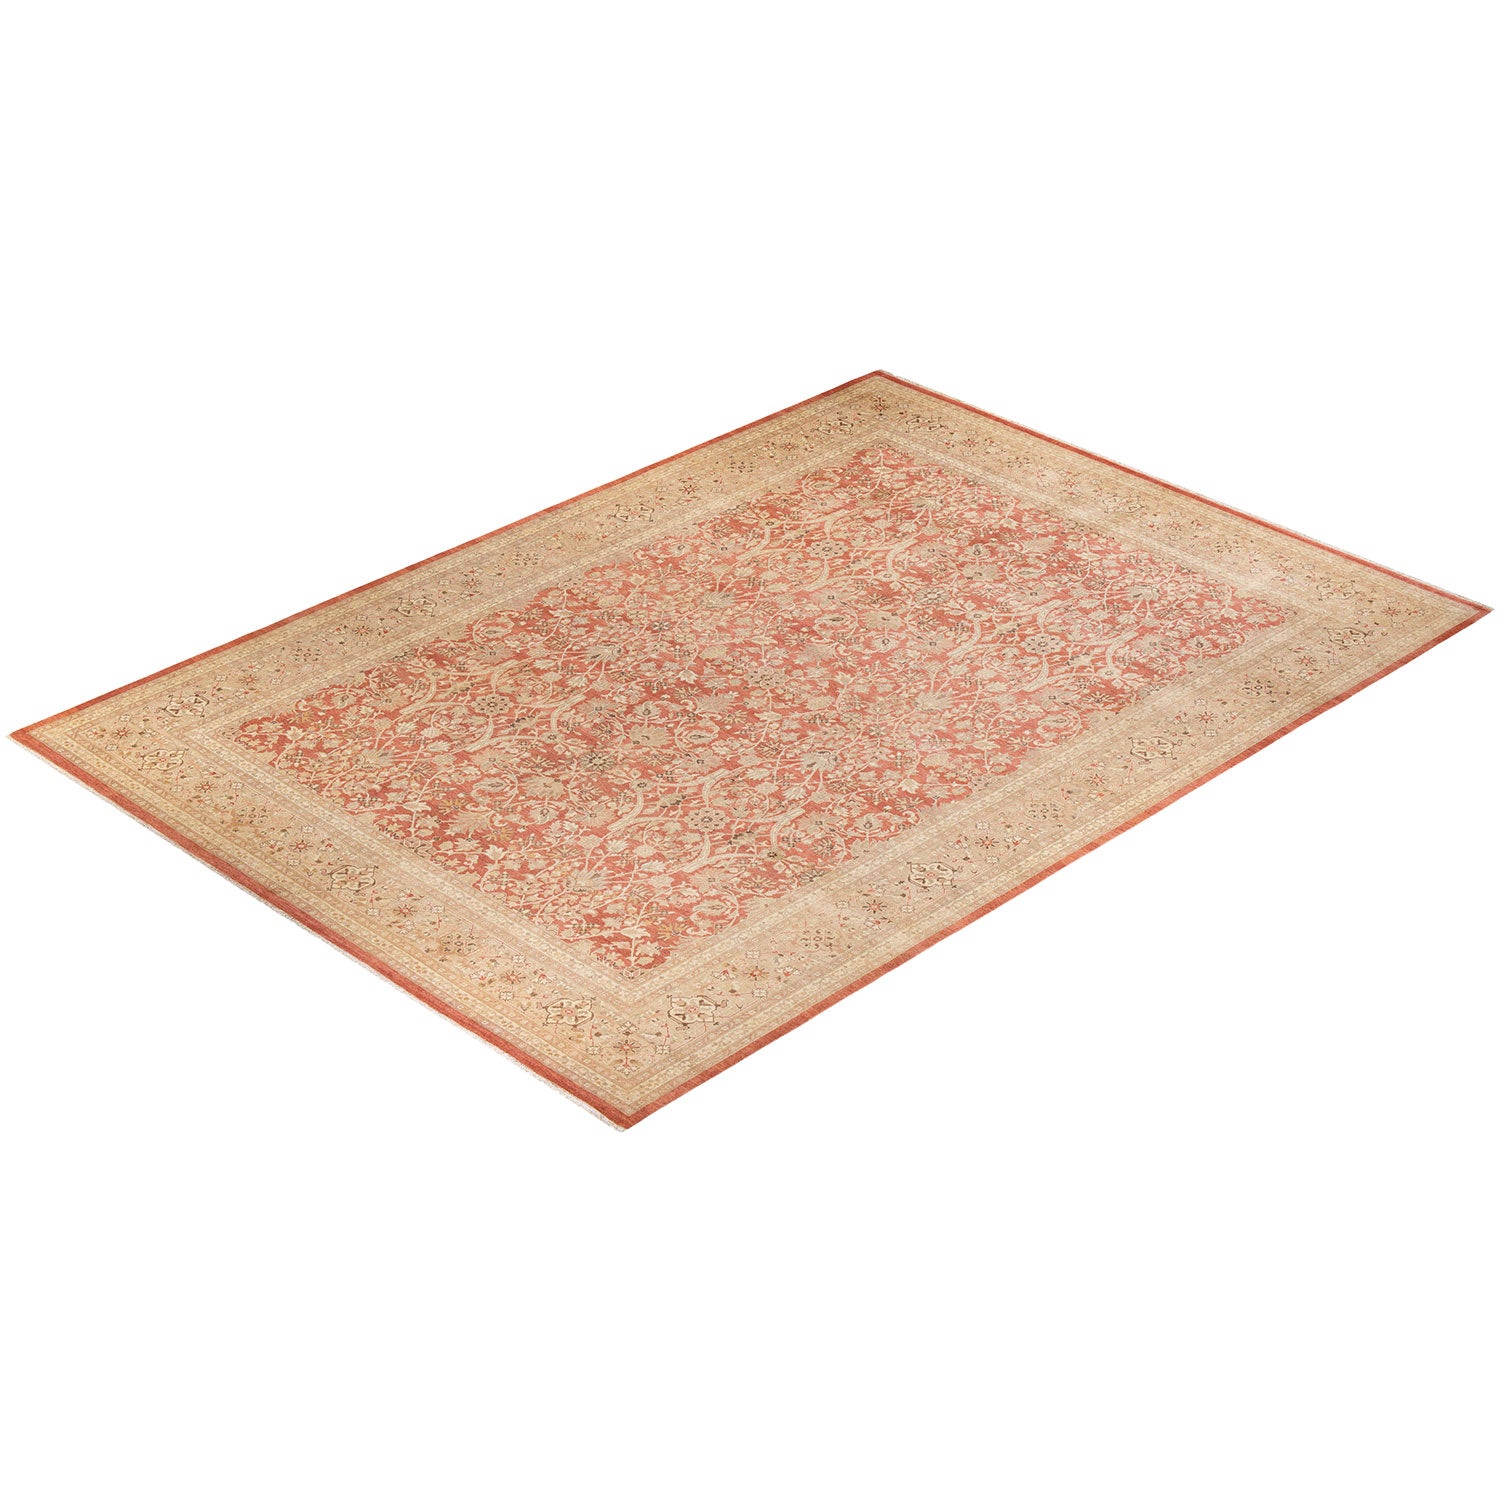 Rectangular carpet with intricate floral motifs in beige and terracotta hues.